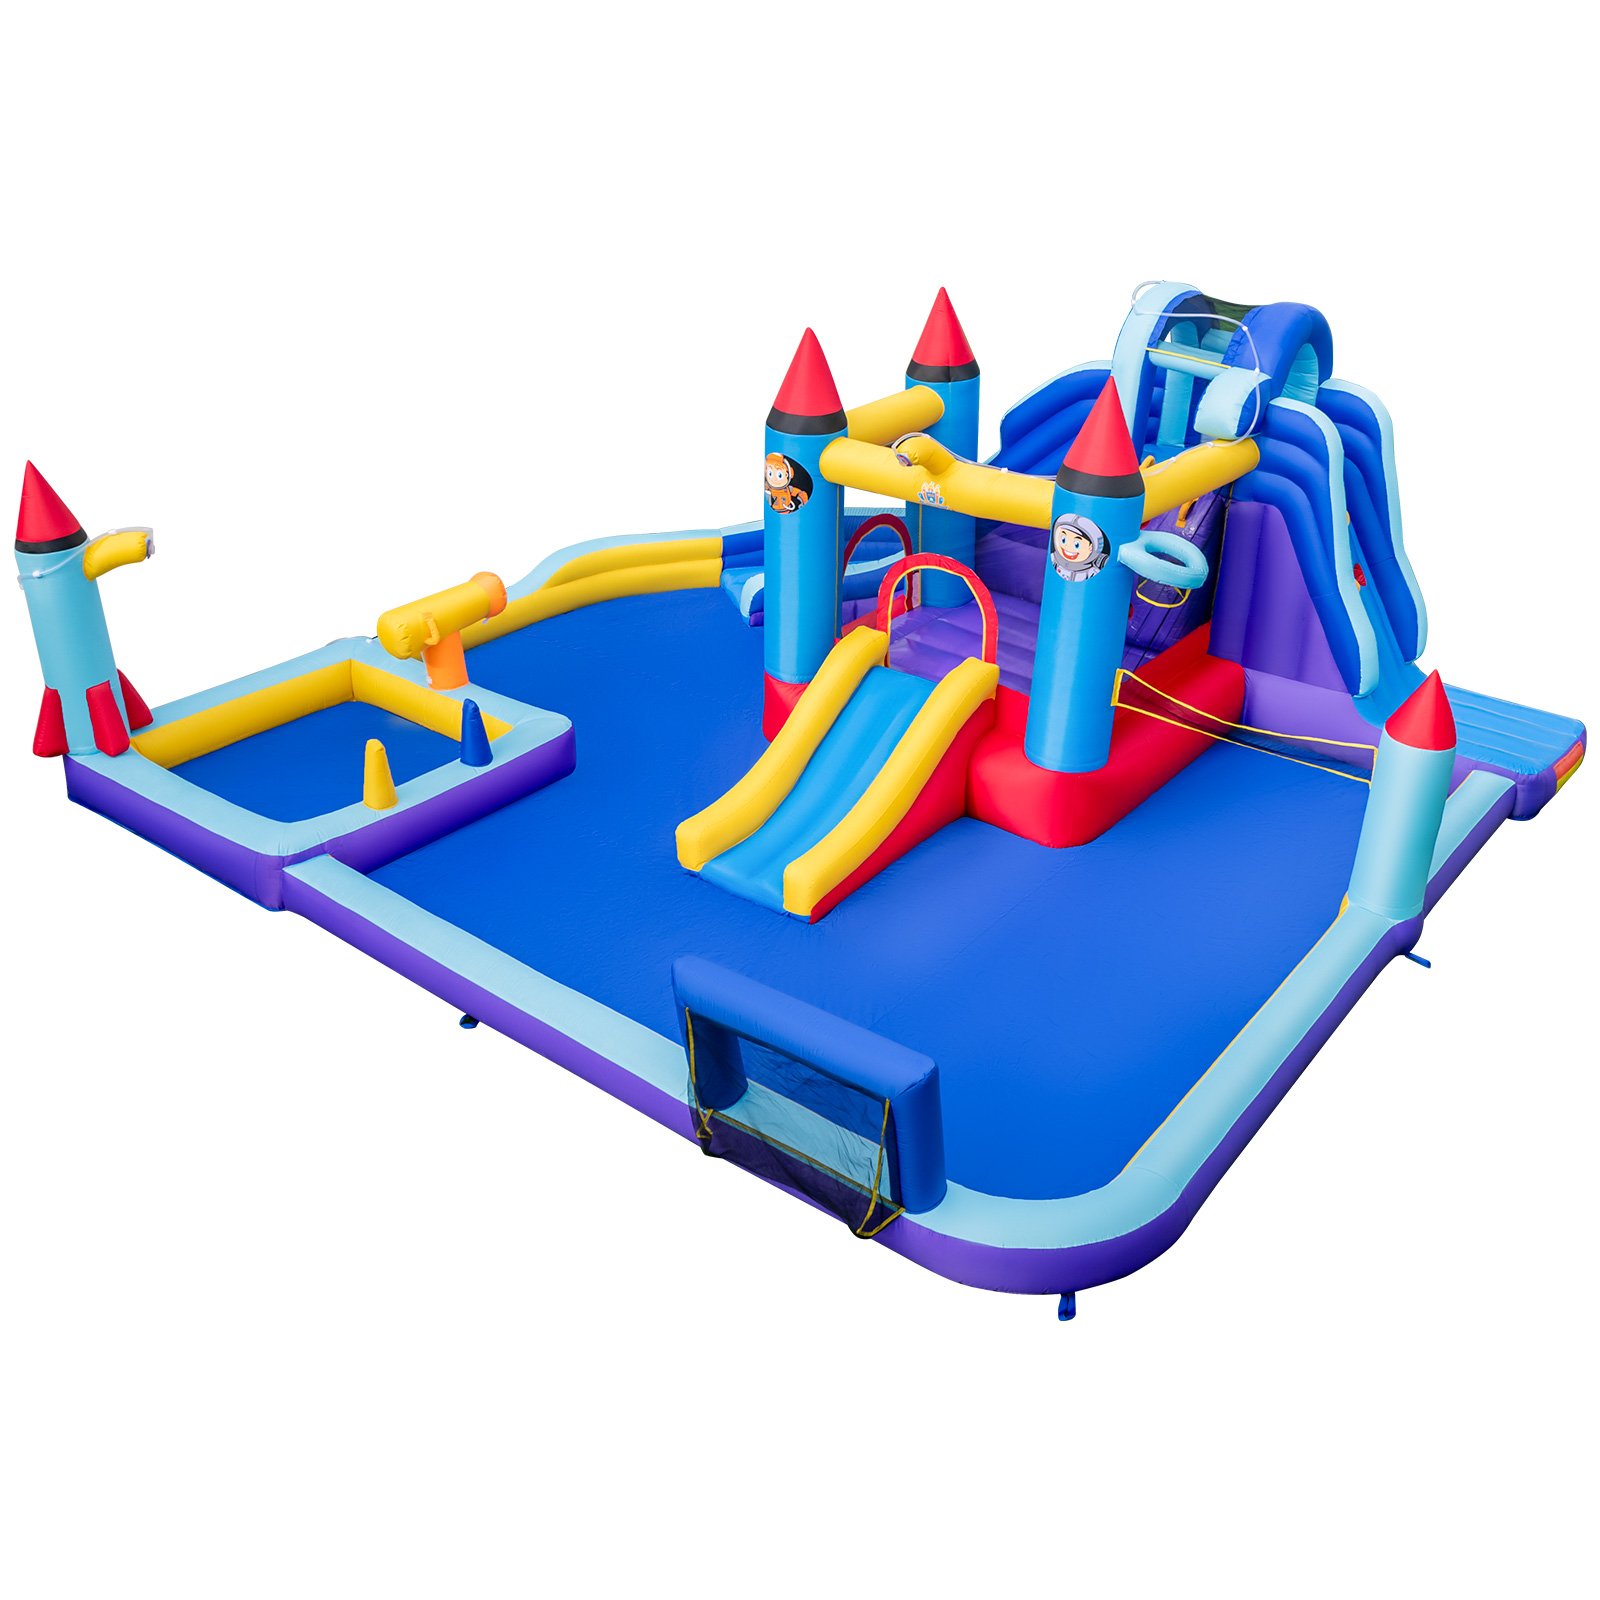 Rocket Theme Inflatable Water Slide Park with 2 Slides